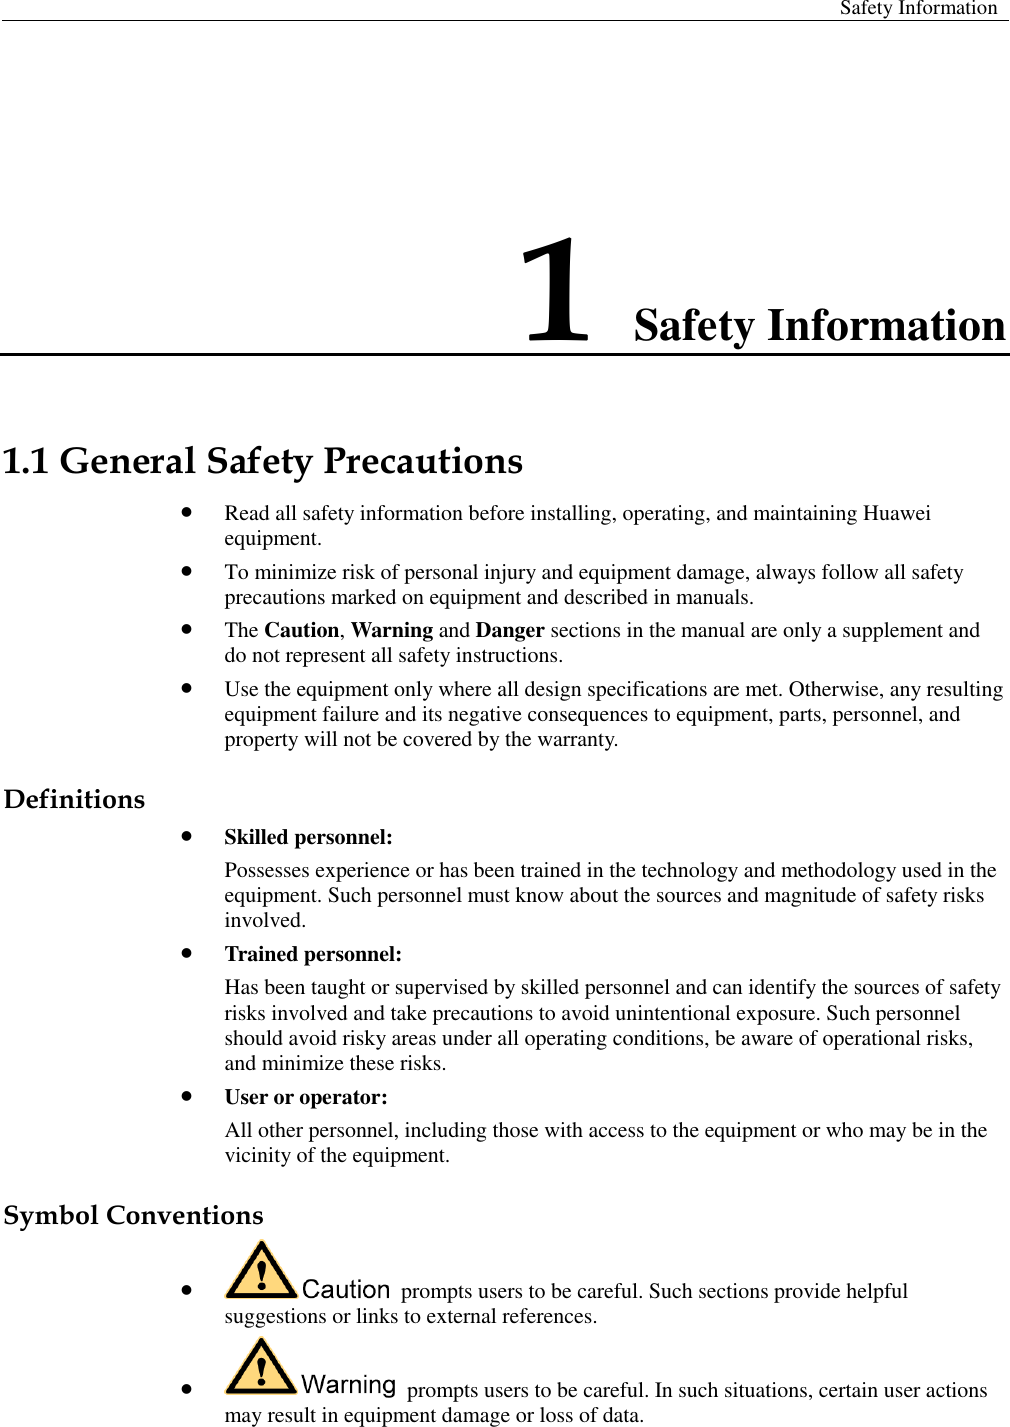  Safety Information  1 Safety Information 1.1 General Safety Precautions  Read all safety information before installing, operating, and maintaining Huawei equipment.    To minimize risk of personal injury and equipment damage, always follow all safety precautions marked on equipment and described in manuals.    The Caution, Warning and Danger sections in the manual are only a supplement and do not represent all safety instructions.  Use the equipment only where all design specifications are met. Otherwise, any resulting equipment failure and its negative consequences to equipment, parts, personnel, and property will not be covered by the warranty. Definitions  Skilled personnel: Possesses experience or has been trained in the technology and methodology used in the equipment. Such personnel must know about the sources and magnitude of safety risks involved.  Trained personnel: Has been taught or supervised by skilled personnel and can identify the sources of safety risks involved and take precautions to avoid unintentional exposure. Such personnel should avoid risky areas under all operating conditions, be aware of operational risks, and minimize these risks.    User or operator: All other personnel, including those with access to the equipment or who may be in the vicinity of the equipment. Symbol Conventions    prompts users to be careful. Such sections provide helpful suggestions or links to external references.    prompts users to be careful. In such situations, certain user actions may result in equipment damage or loss of data. 